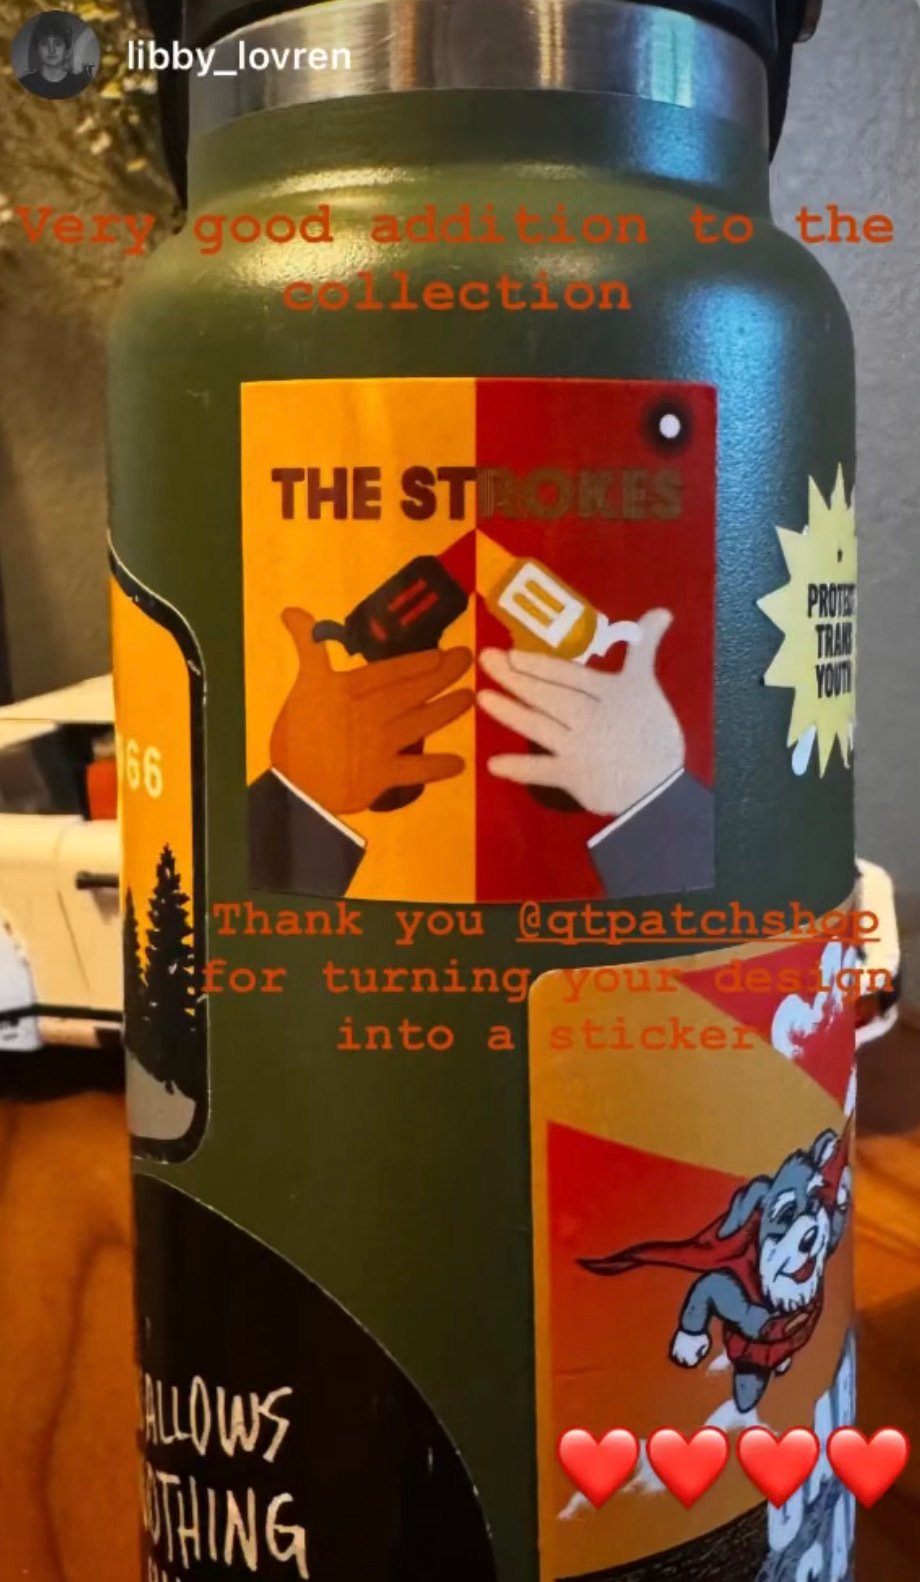 The Strokes Room On Fire Water-proof Sticker